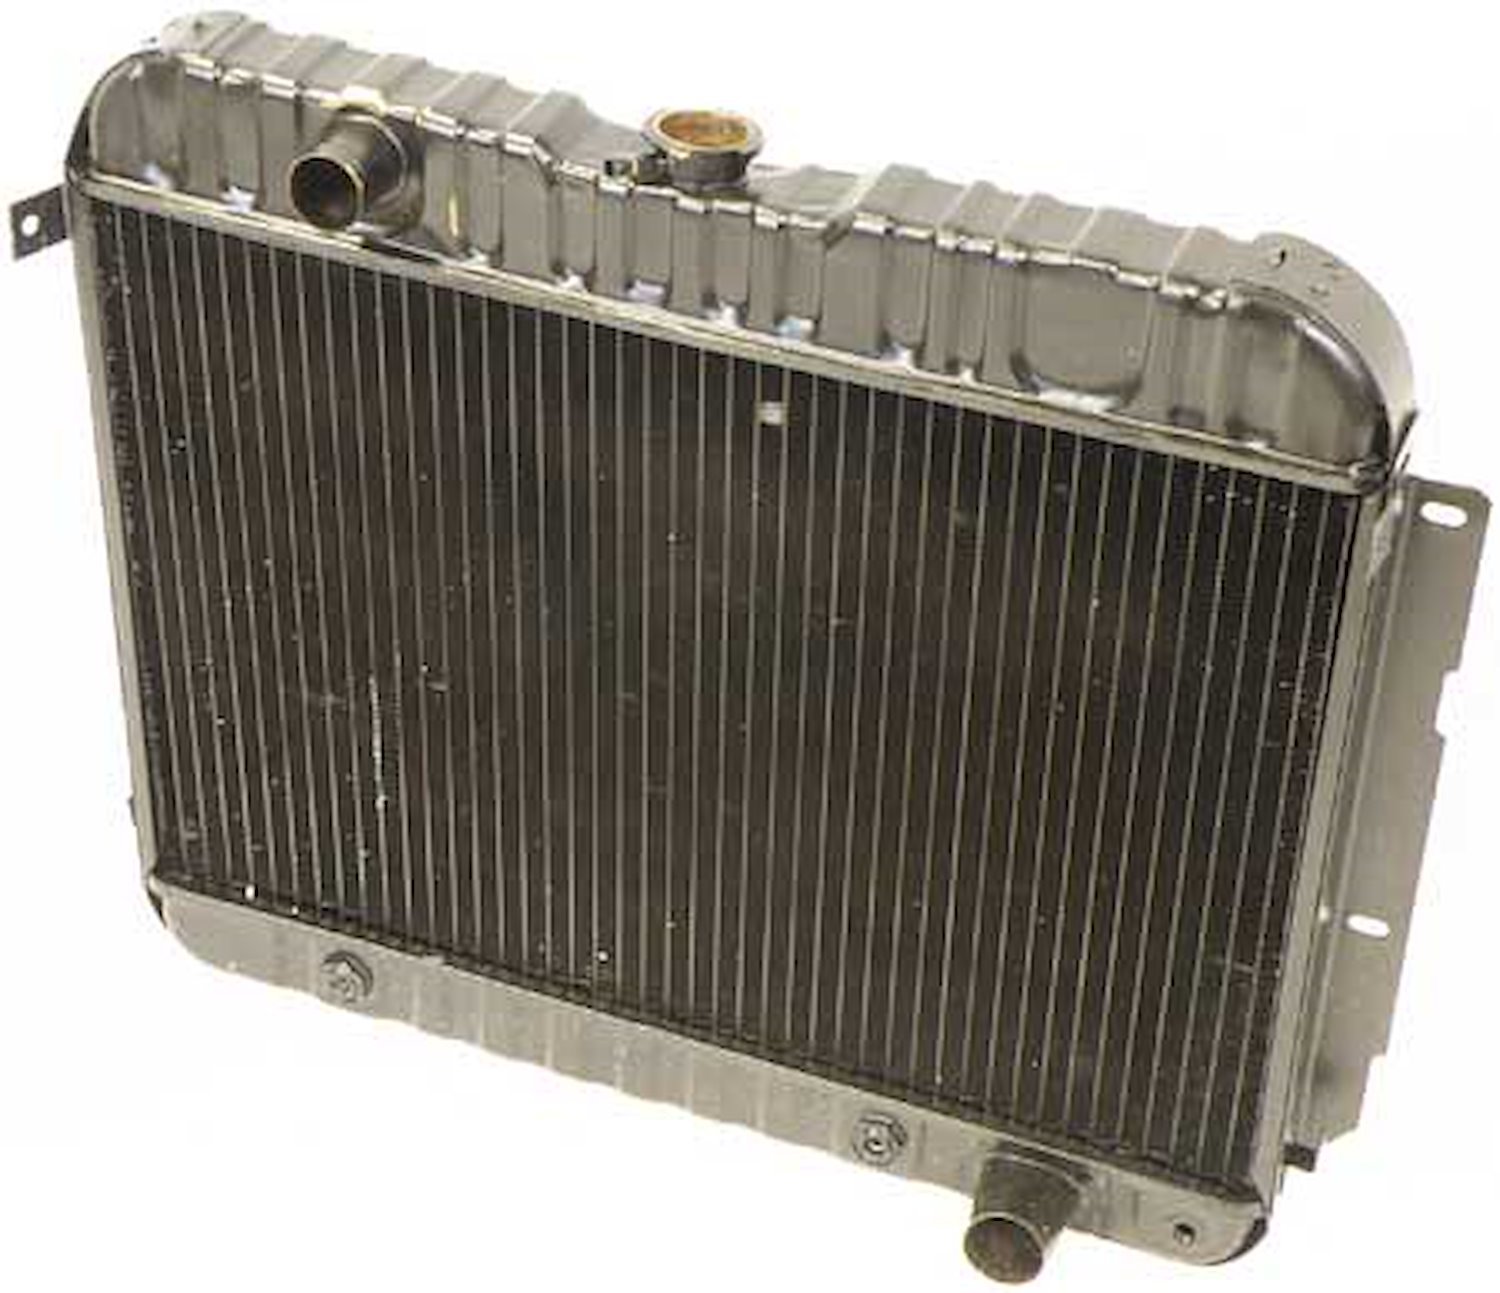 CRD1463A Radiator-1969-70 Chevrolet Full-Size V8 Small Block W/ AT & AC-3 Row (17-1/2" X 25-1/2" X 2" Core)